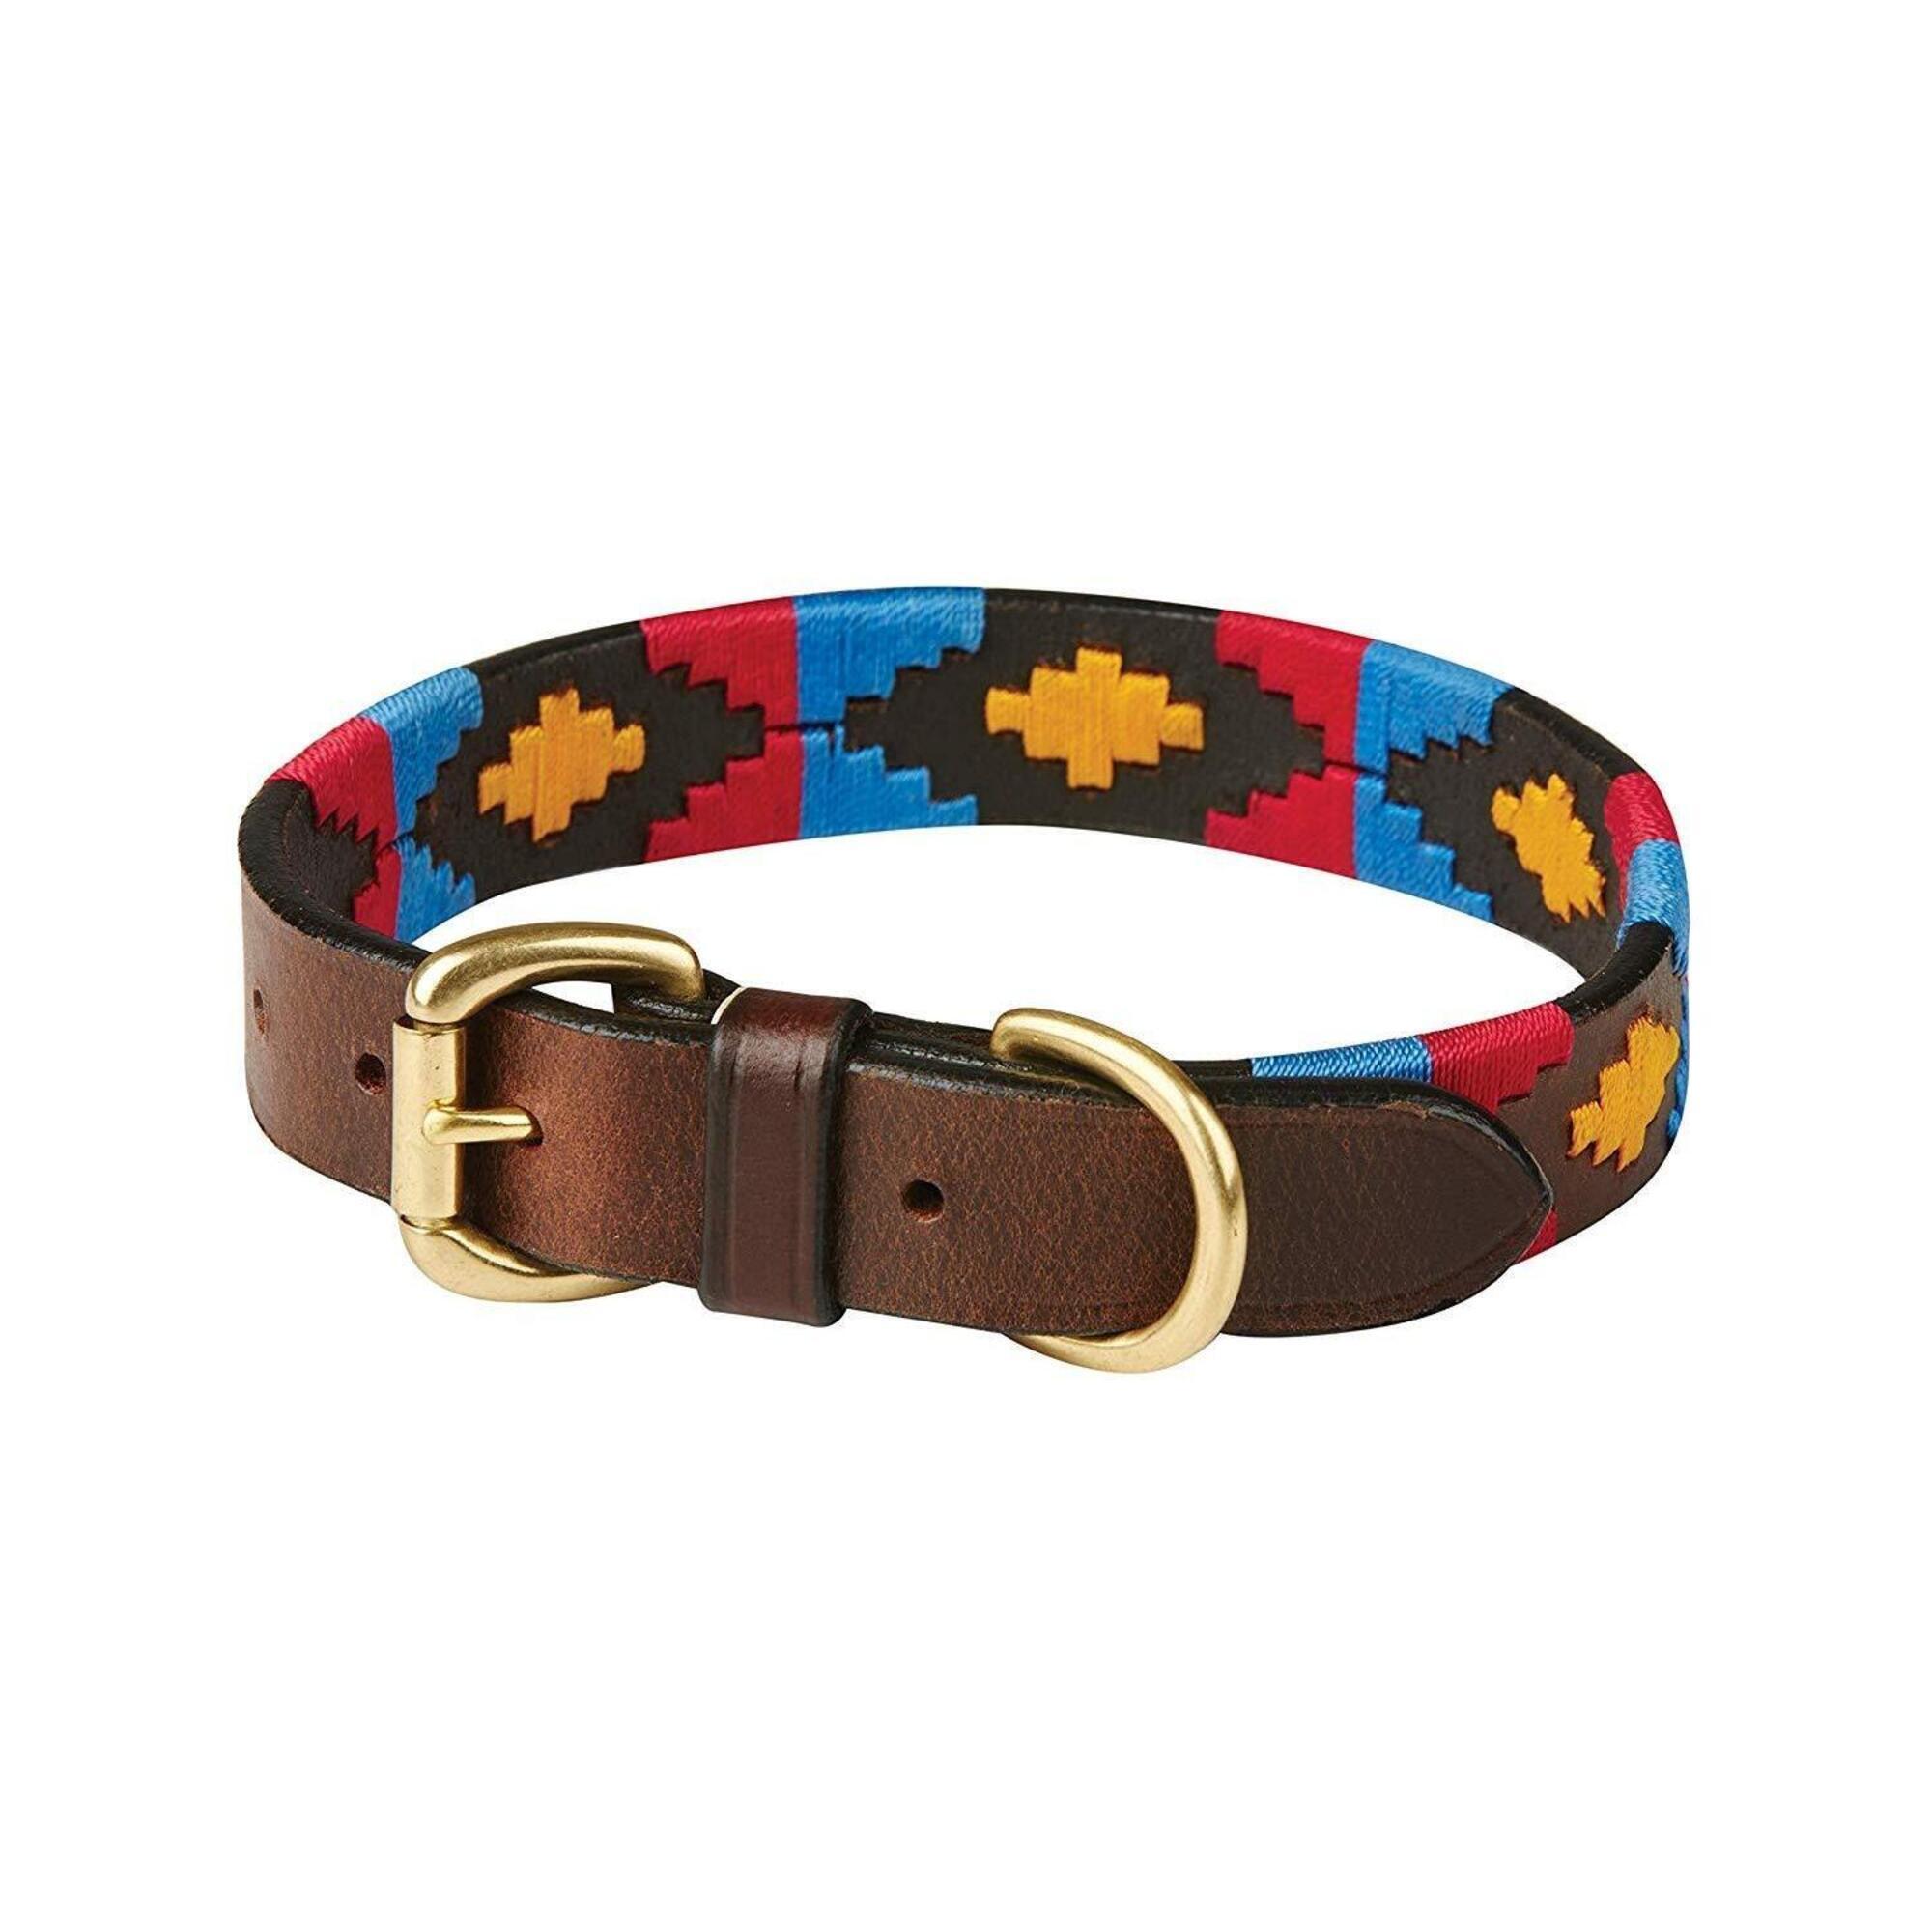 Polo Leather Dog Collar (Cowdray Brown/Pink/Blue/Yellow) 1/4